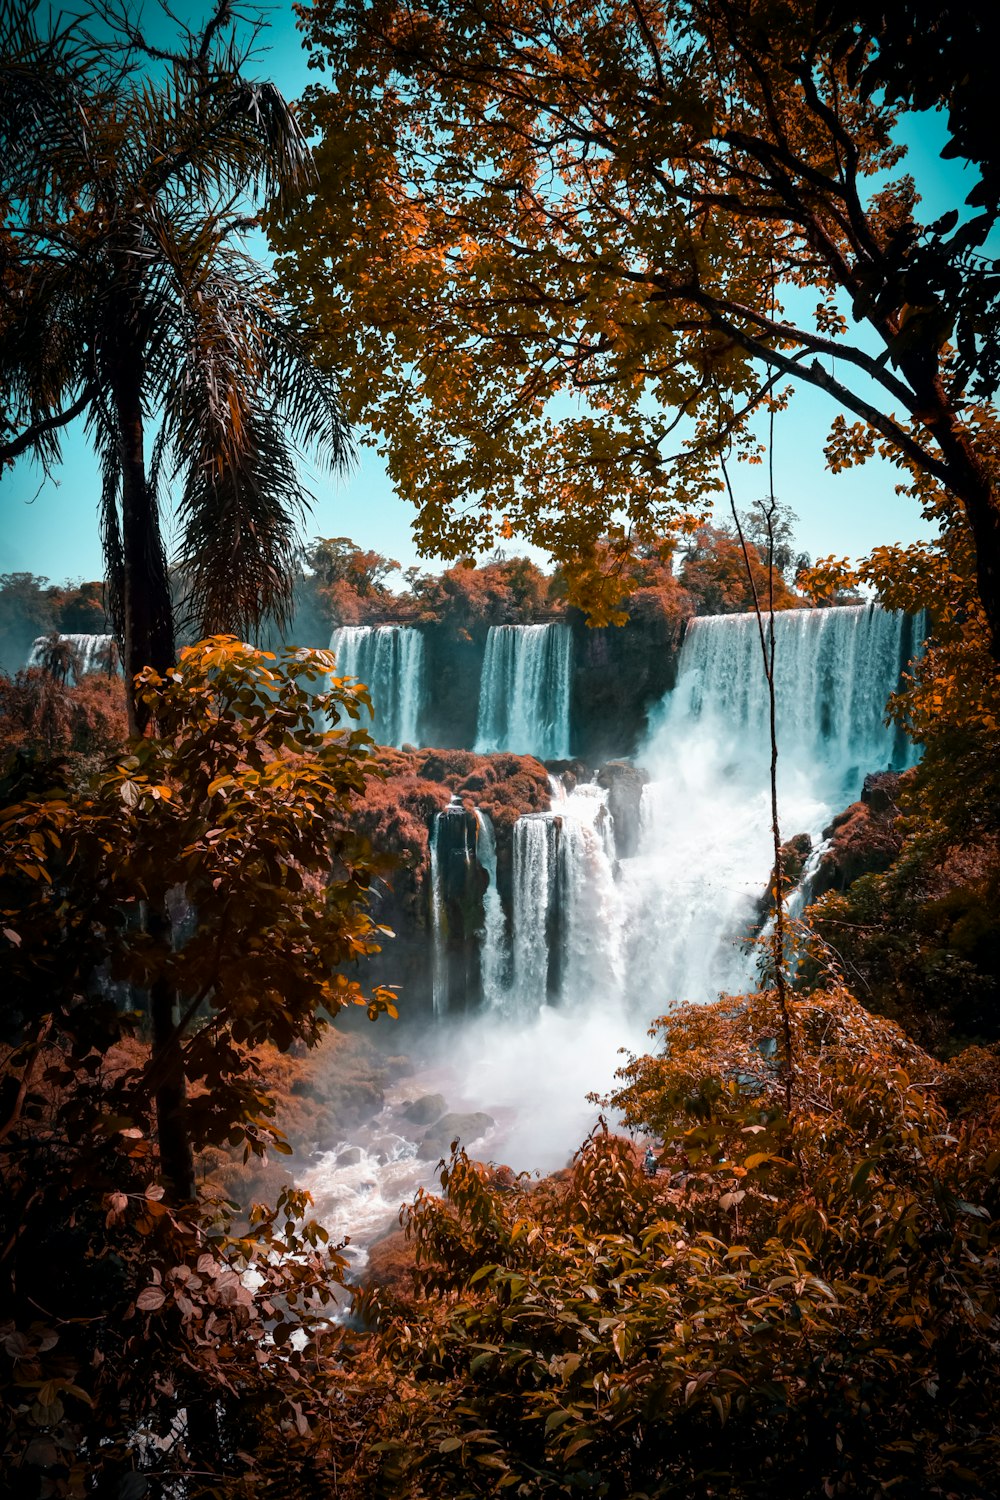 500 Waterfall Images Stunning Download Free Pictures On Unsplash